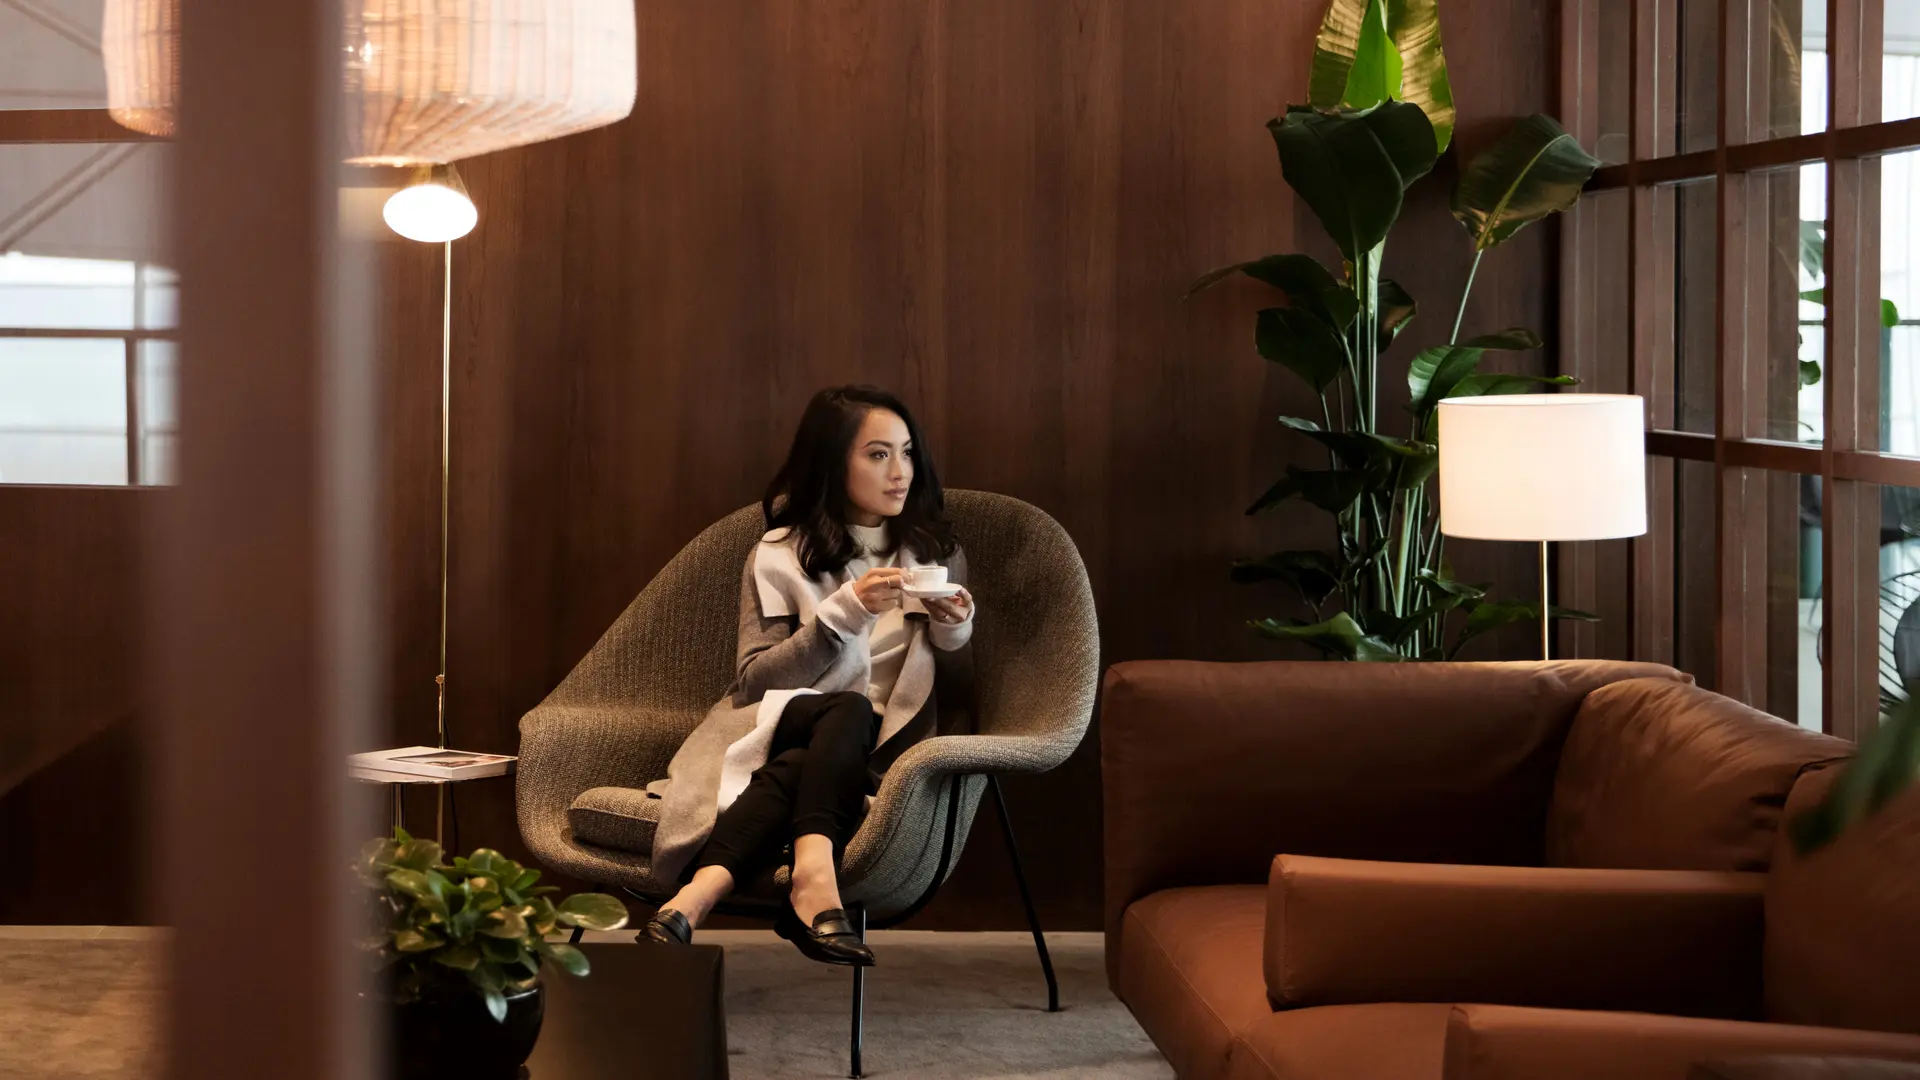 Airlines News - Cathay Pacific reopens lounges in Hong Kong, Singapore and Japan